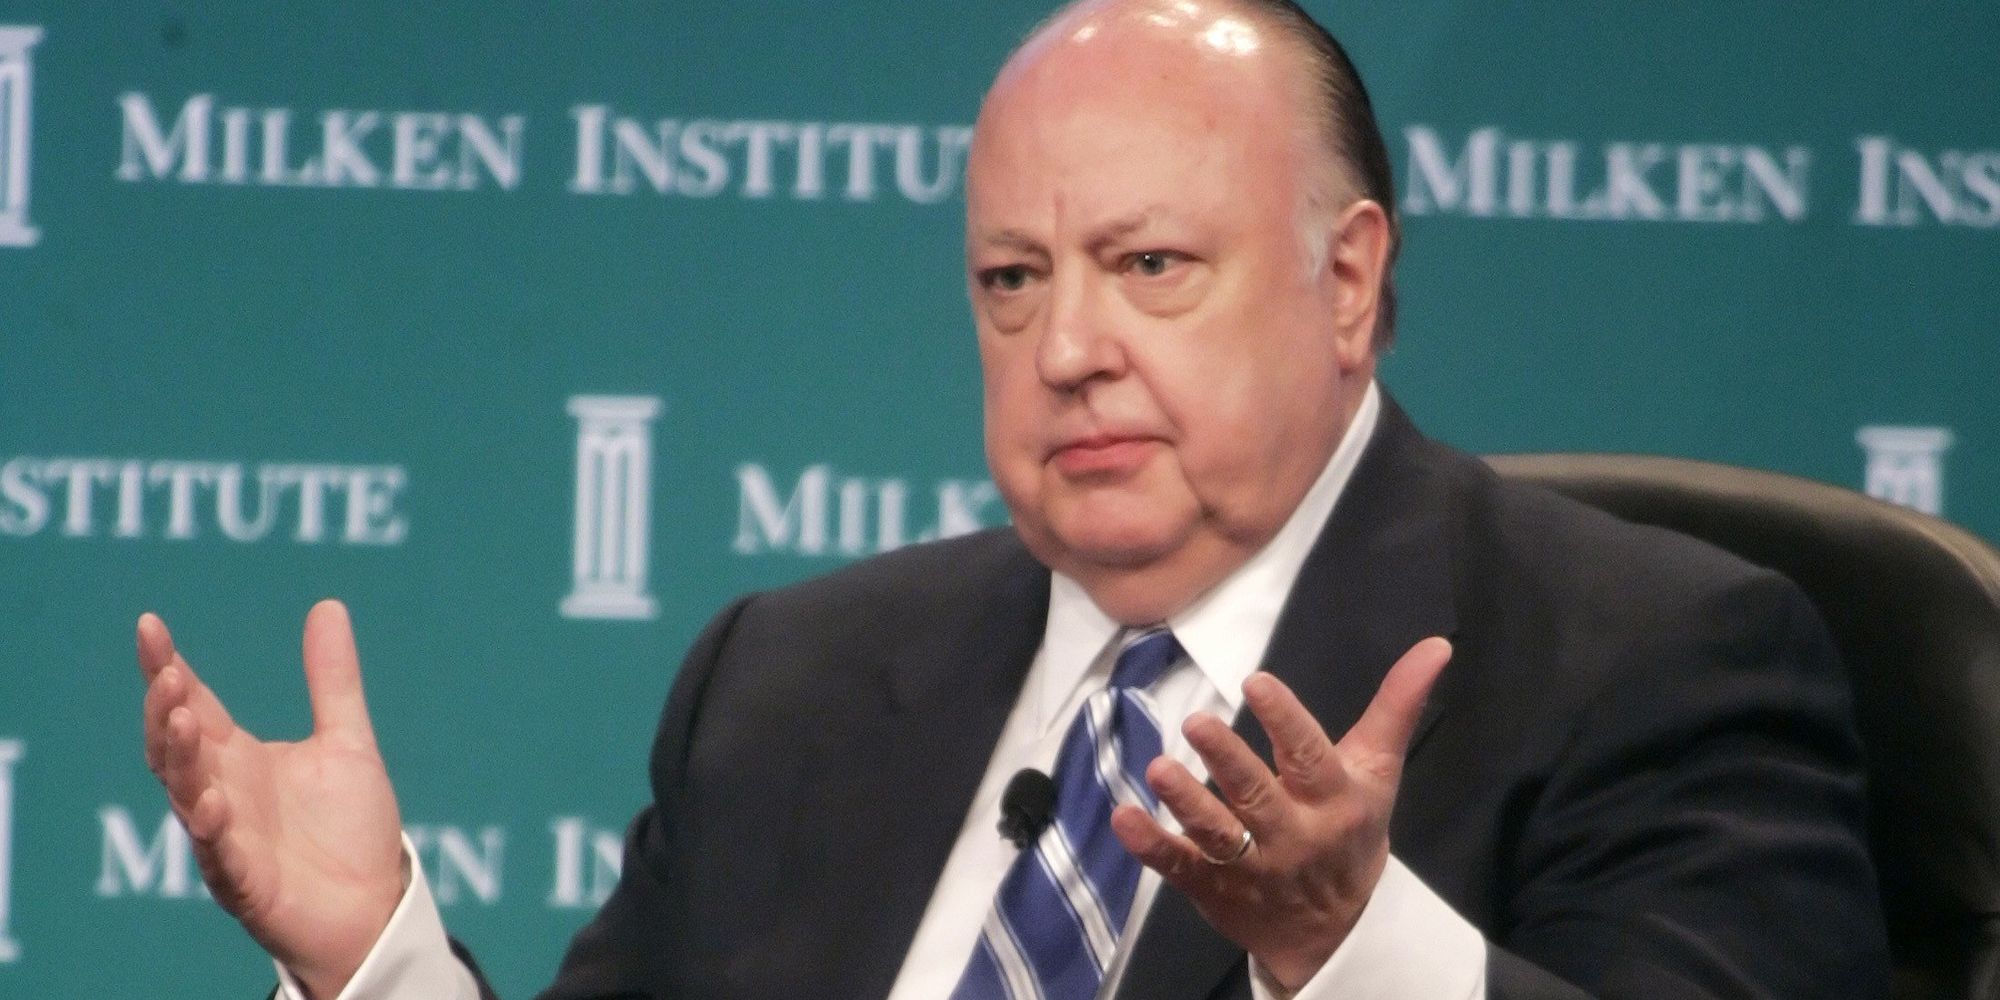 Here Are The Women Publicly Accusing Roger Ailes Of Sexual Harassment The Huffington Post 